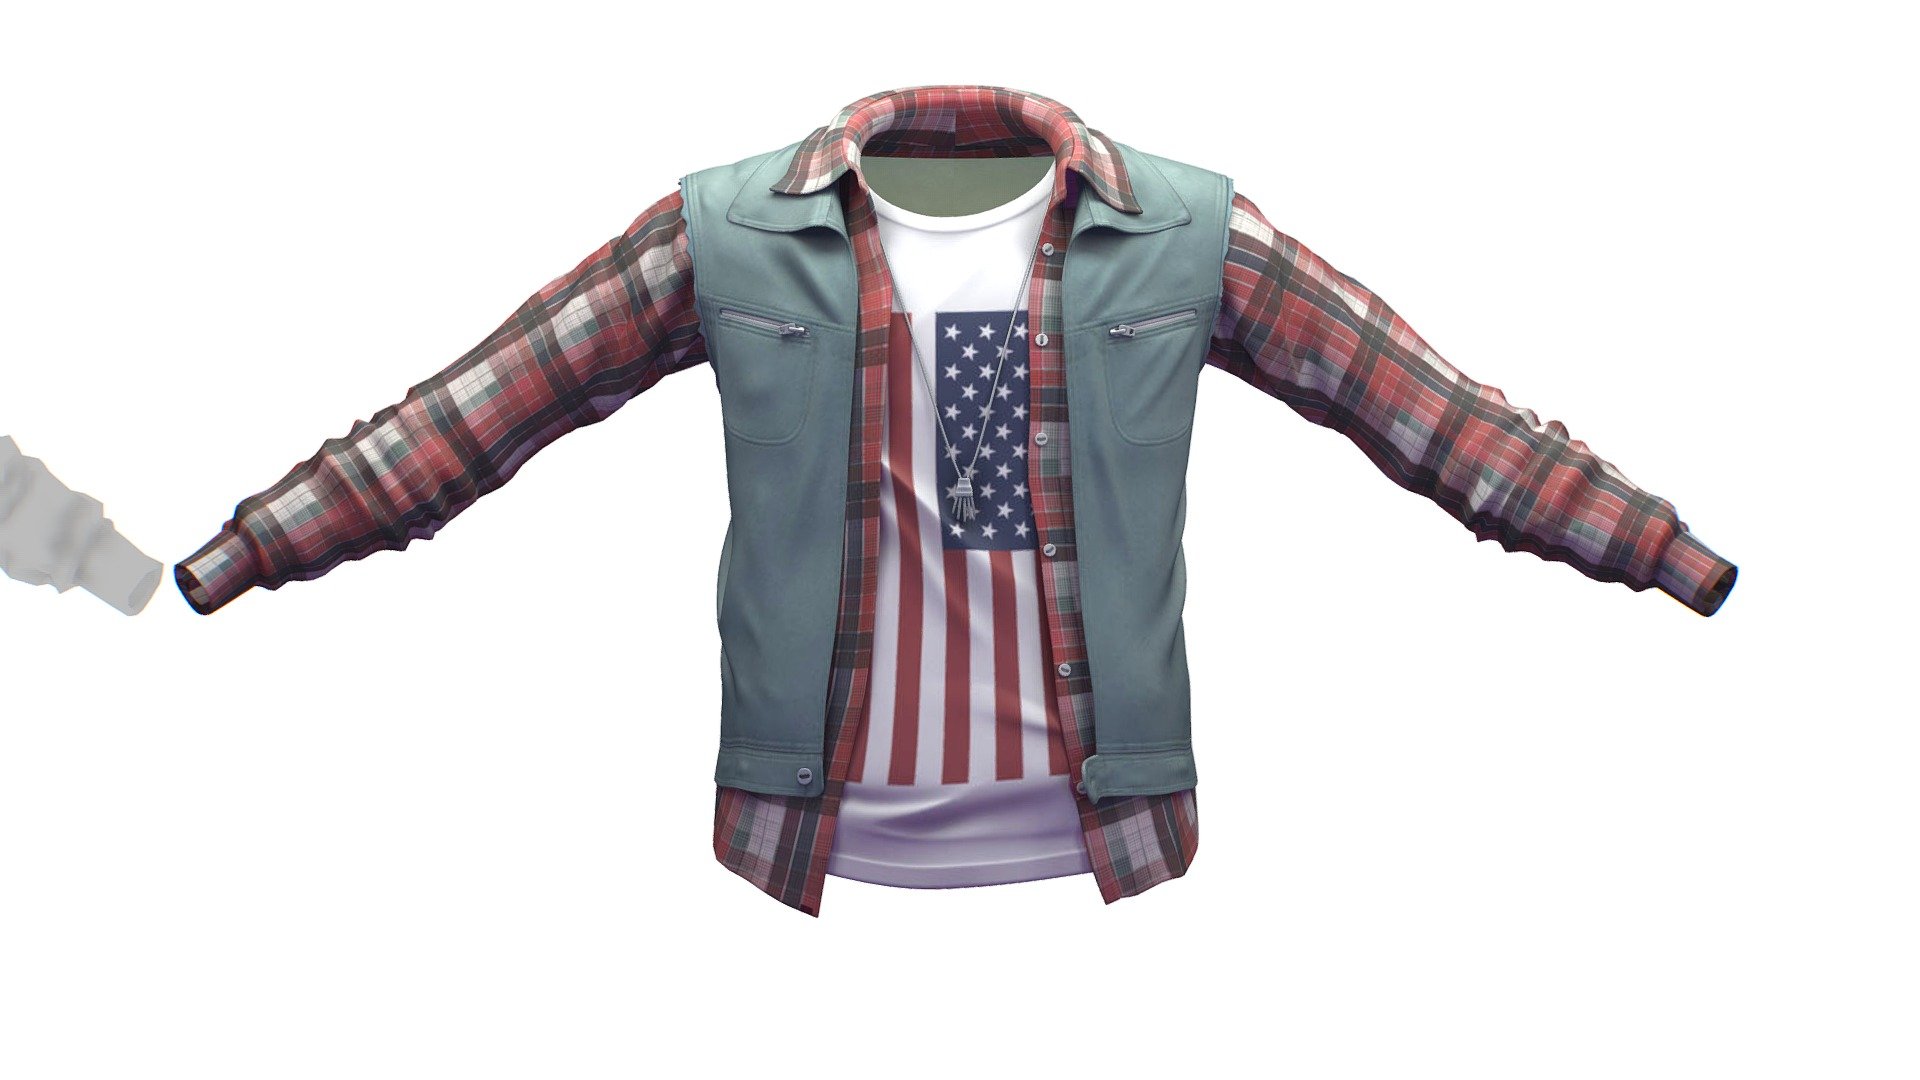 Cartoon High Poly Subdivision American Flag Vest

No HDRI map, No Light, No material settings - only Diffuse/Color Map Texture (2700х2700)

More information about the 3D model: please use the Sketchfab Model Inspector - Key (i) - Cartoon High Poly Subdivision American Flag Vest - Buy Royalty Free 3D model by Oleg Shuldiakov (@olegshuldiakov) 3d model